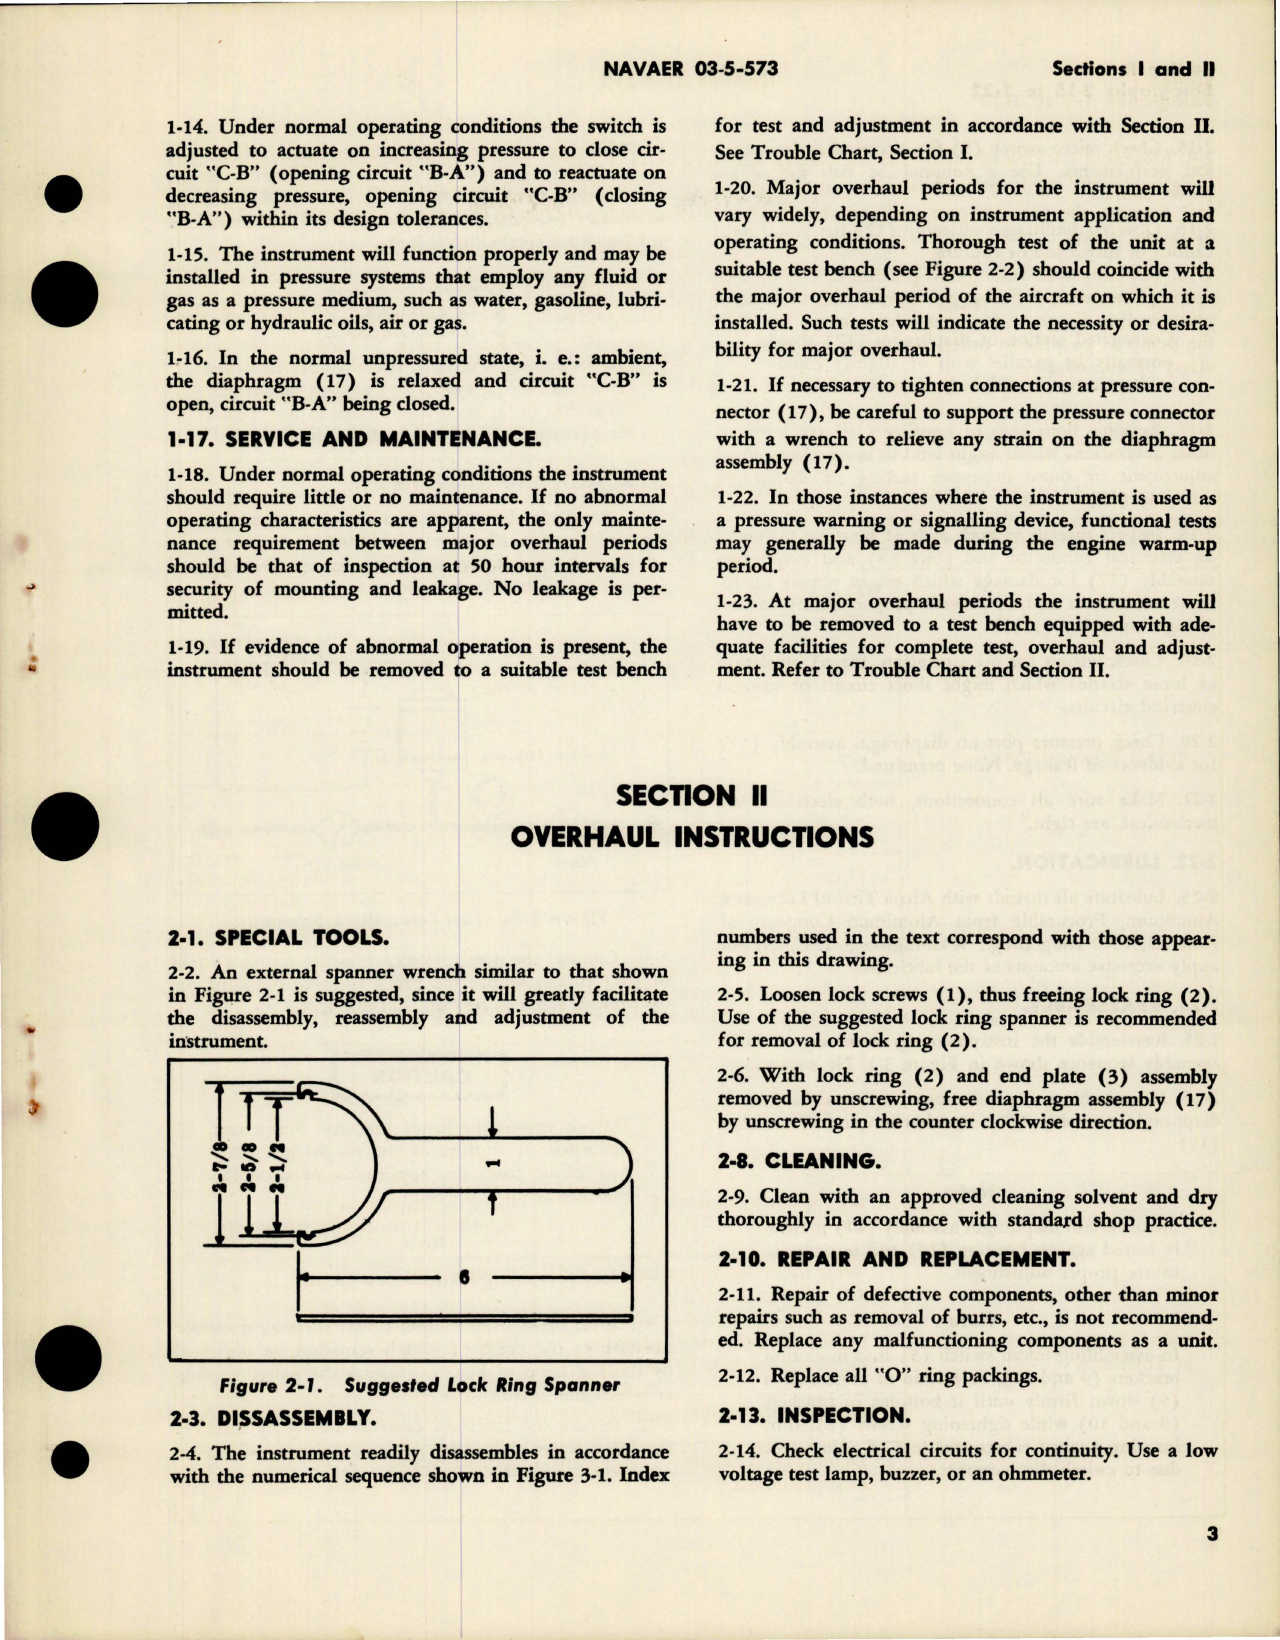 Sample page 5 from AirCorps Library document: Operation, Service, Overhaul, and Parts for Pressure Actuated Switch - Model 417-22B-39 